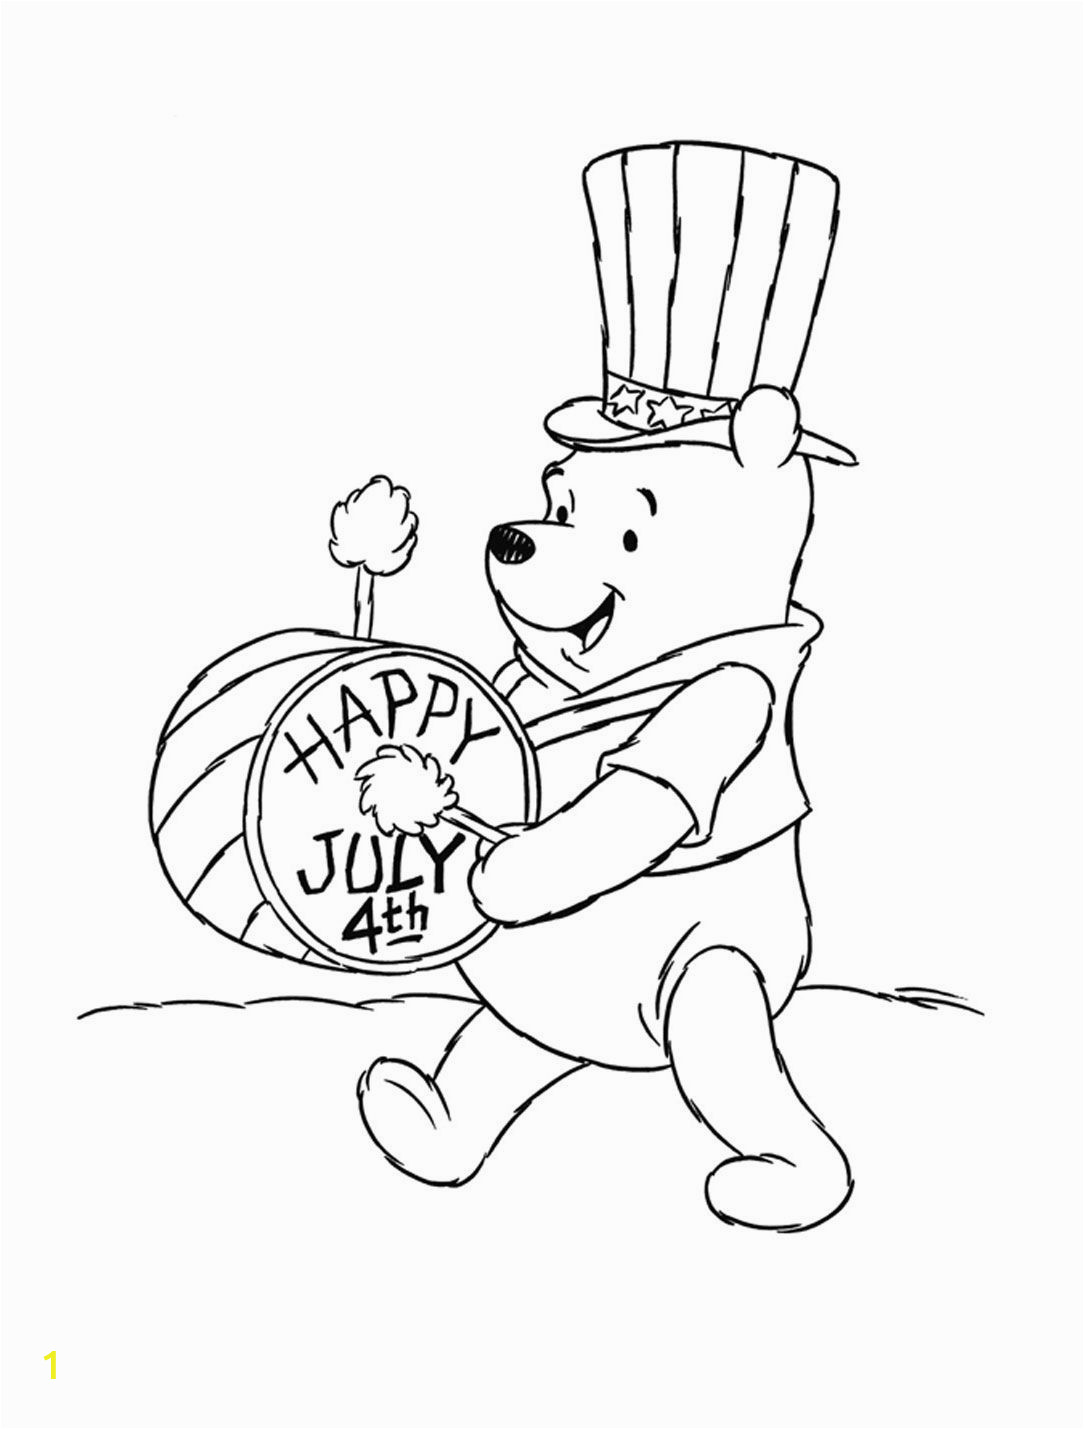 4th of july coloring pages disney